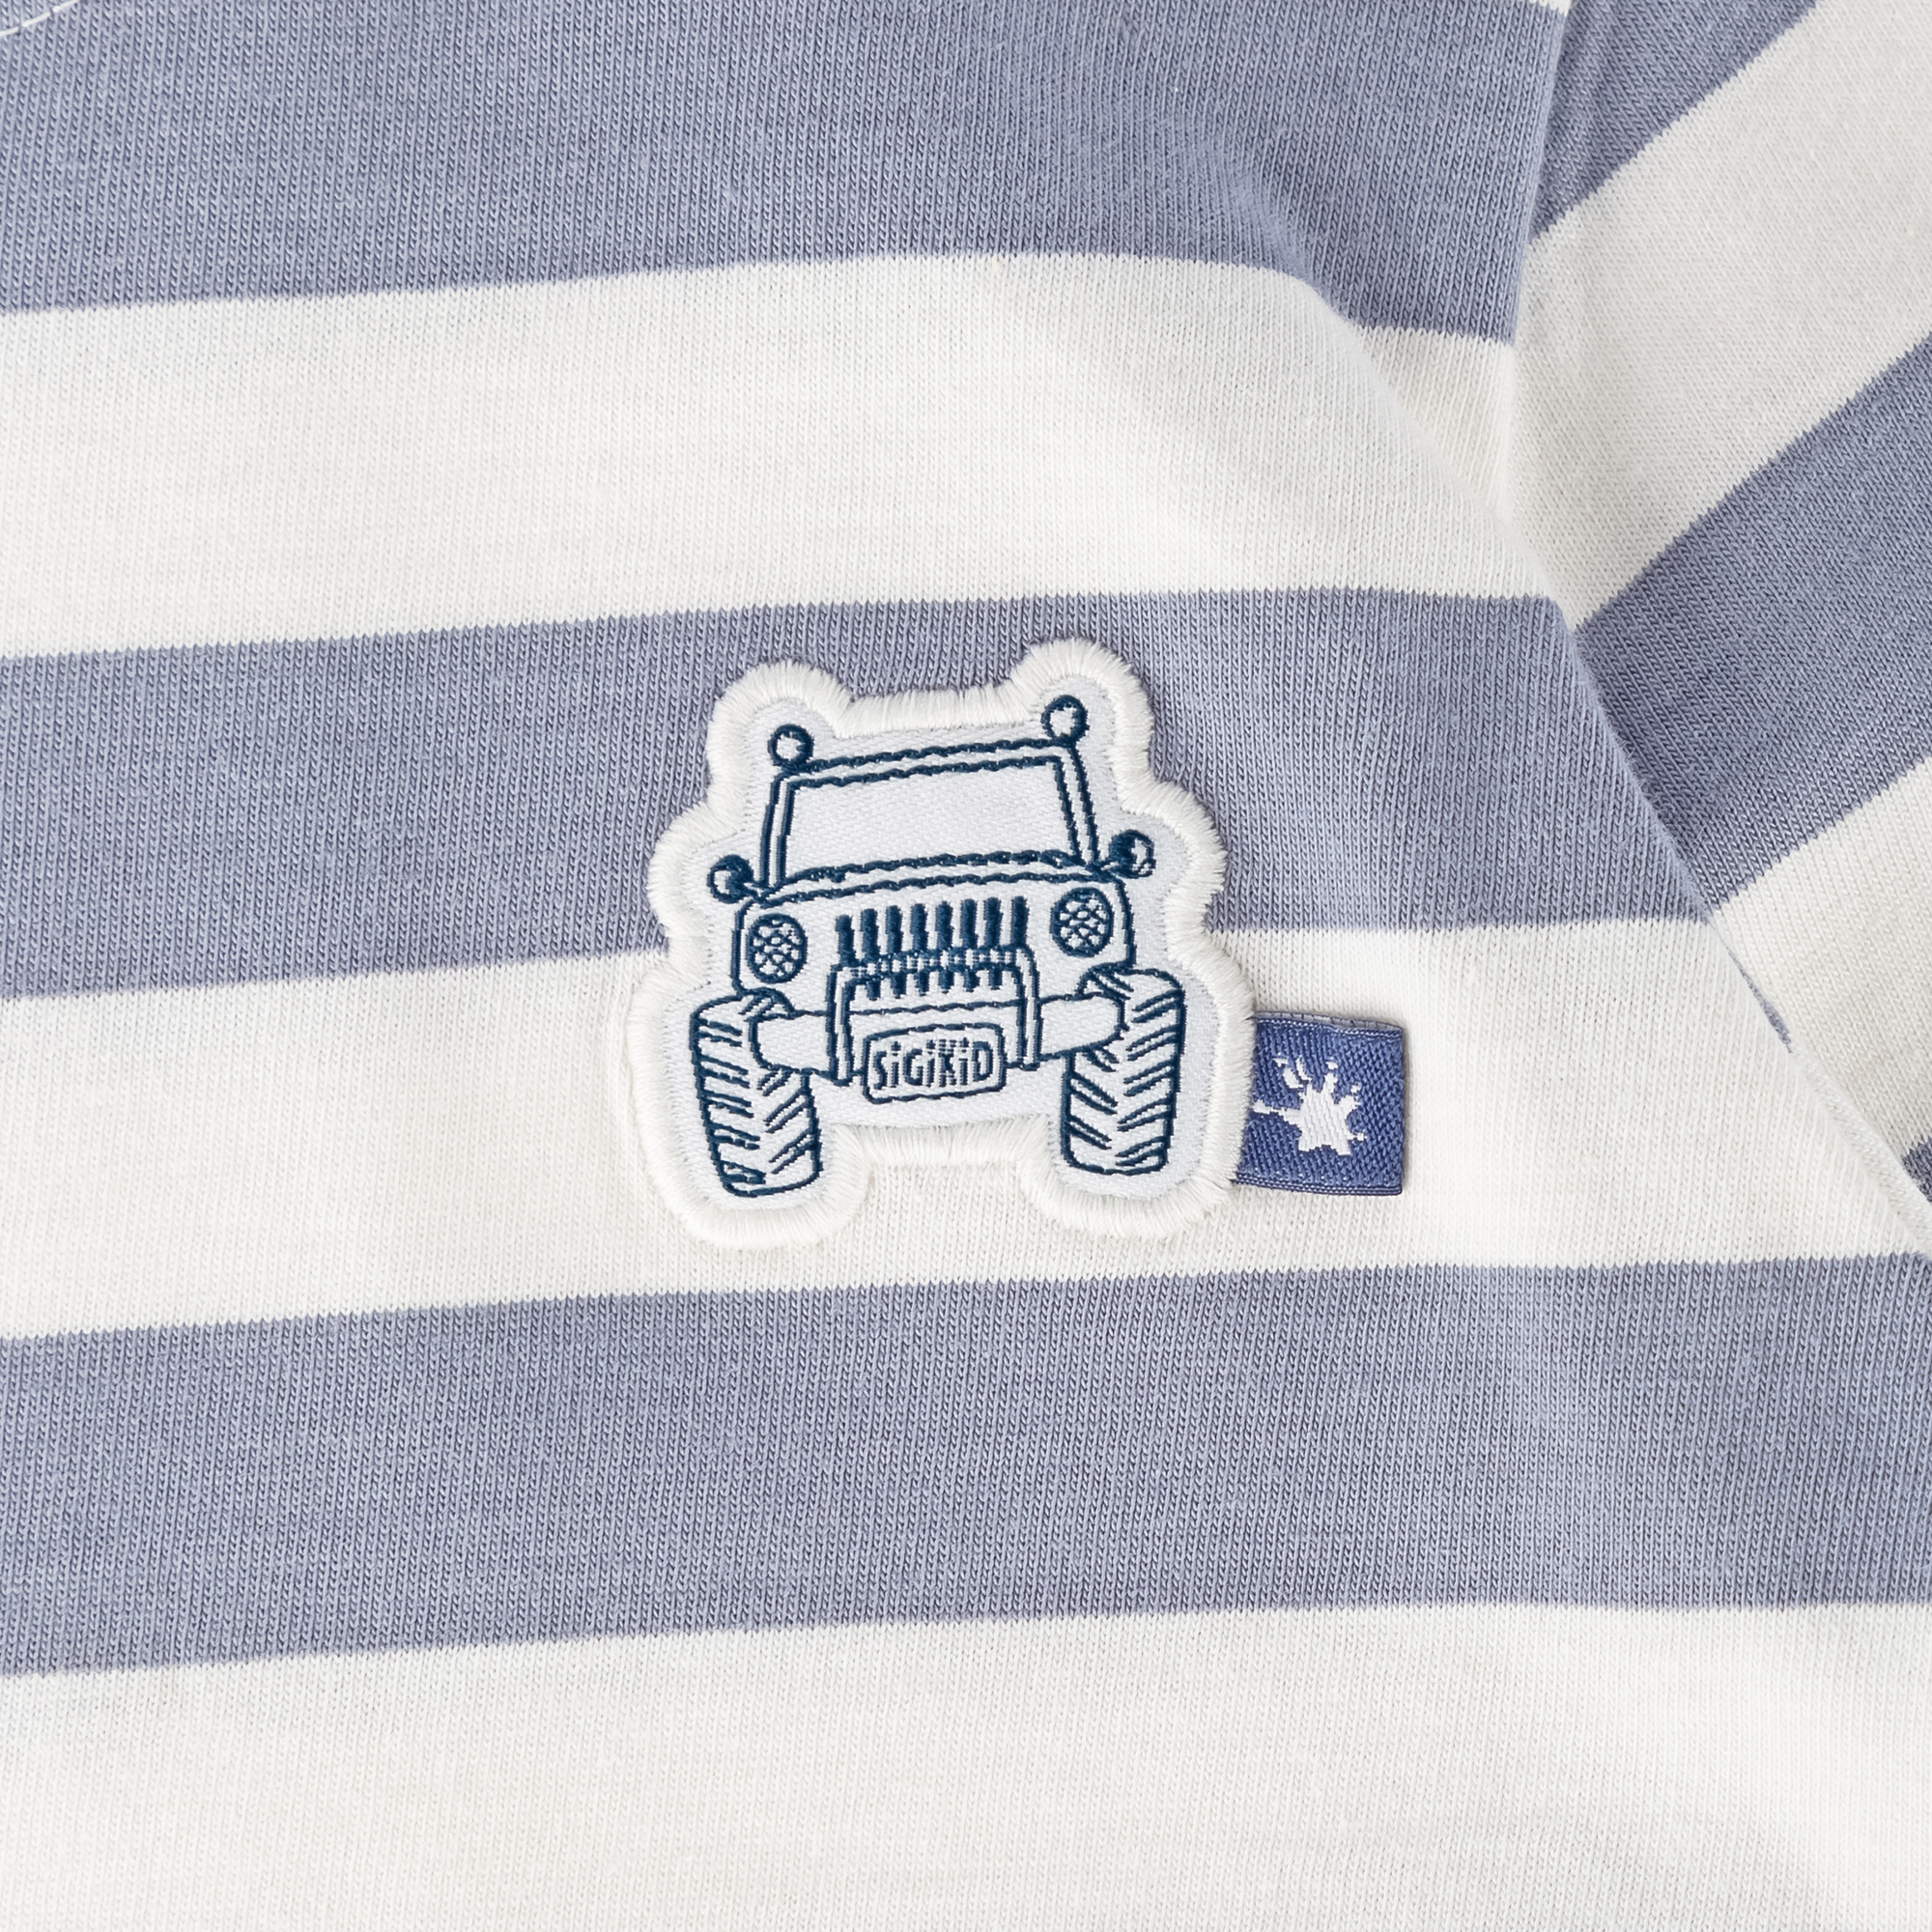 Striped children's long sleeve Tee jeep patch